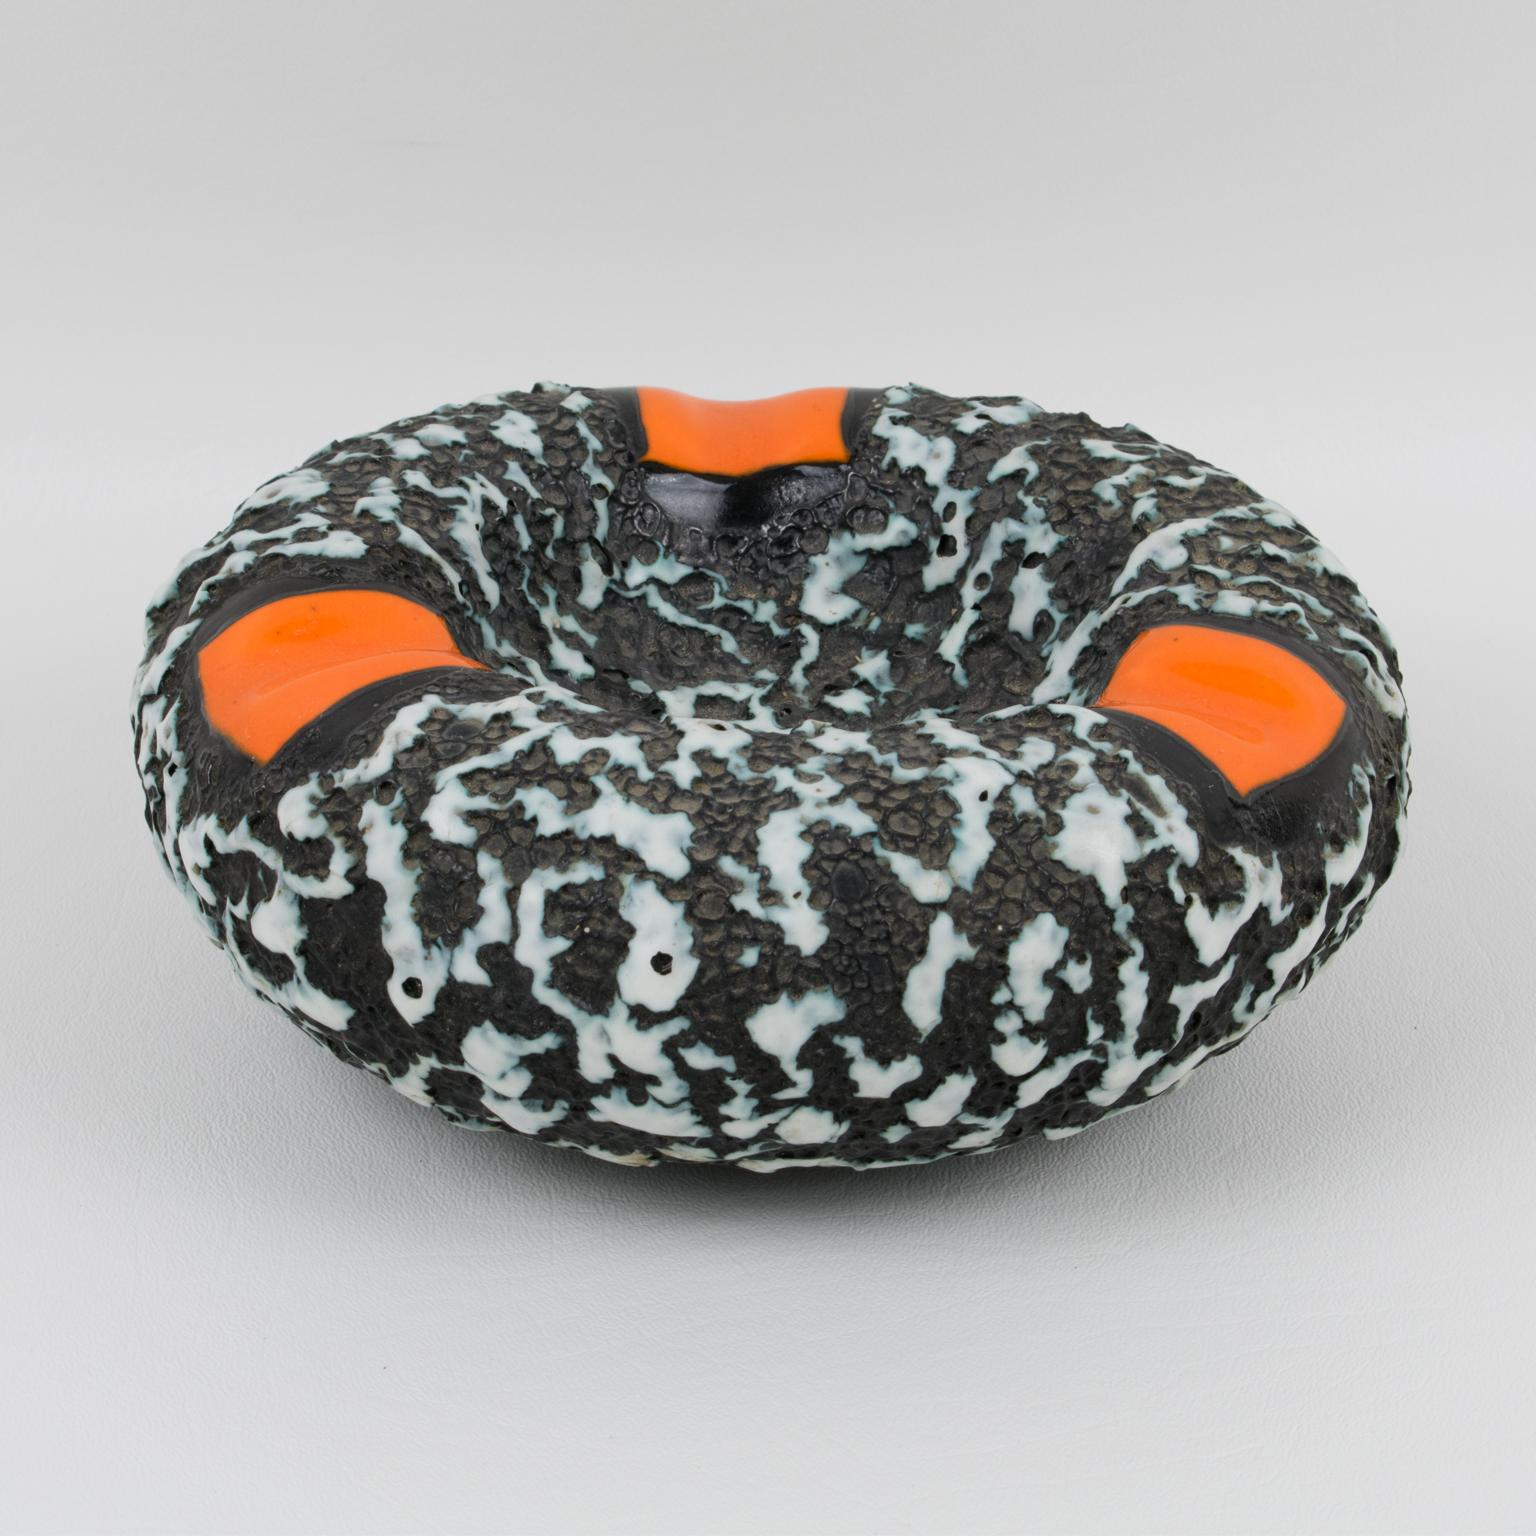 Lovely 1960s French ceramic cigar ashtray, desk tidy, vide poche, or catchall, reminiscent of Marius Giuge in Vallauris, work. Extra thick rounded donut shape with a lava textured pattern, in black and white colors with bright orange accents. No